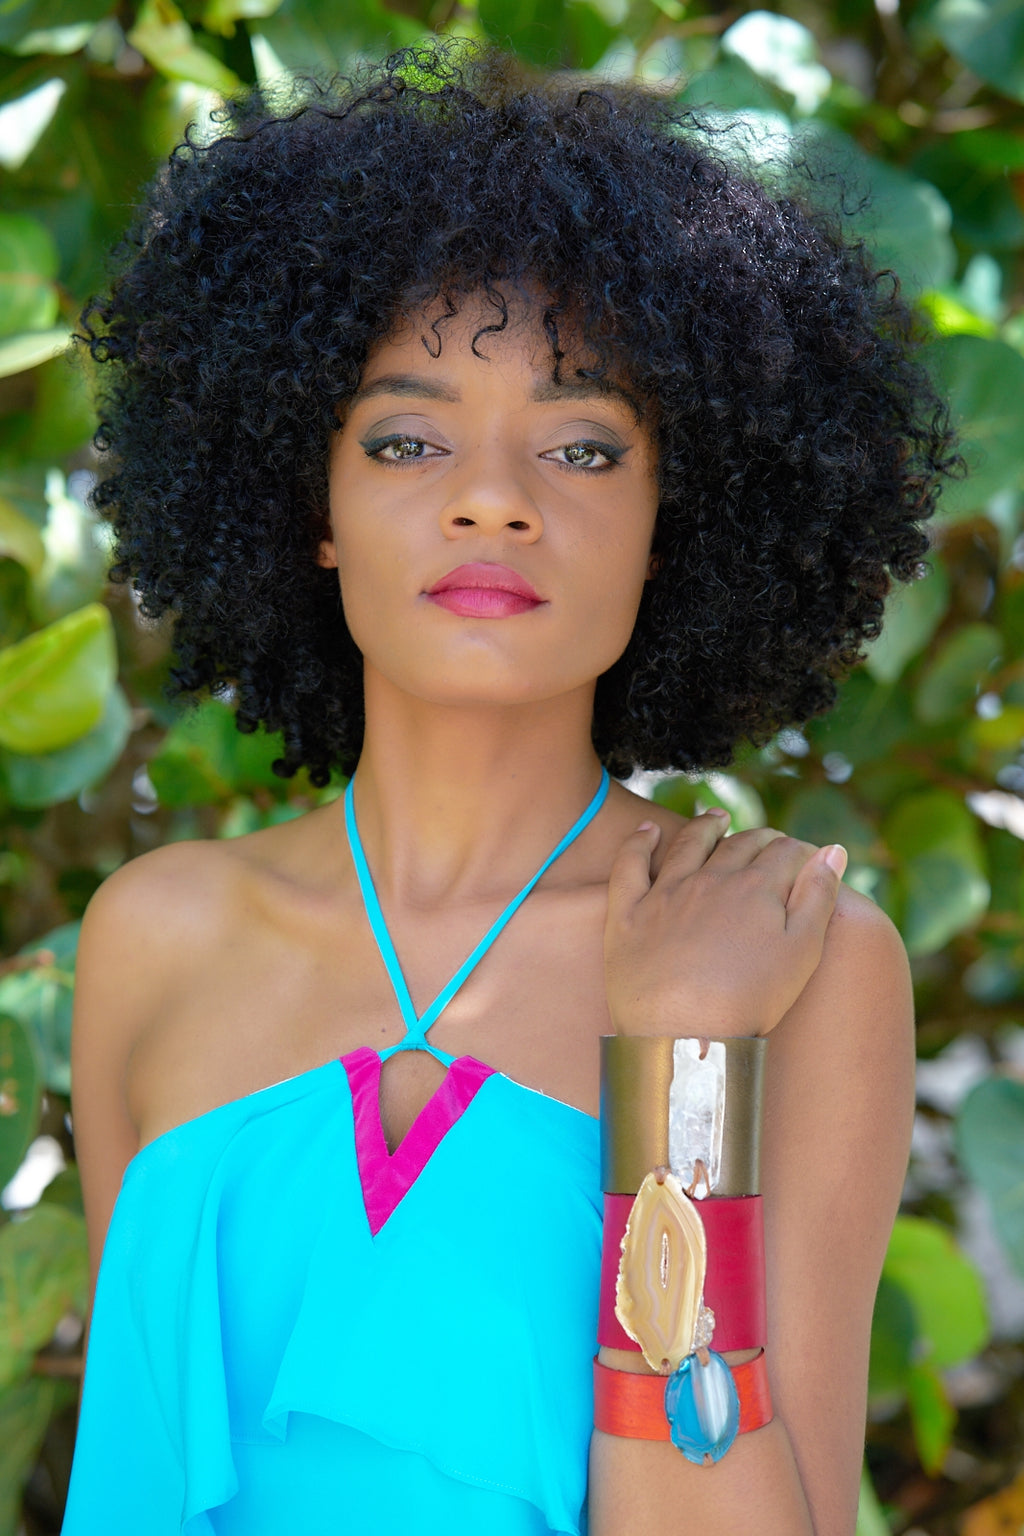 Isy B. Cayman Launches Island Glam Fashion Event at the Ritz Carlton